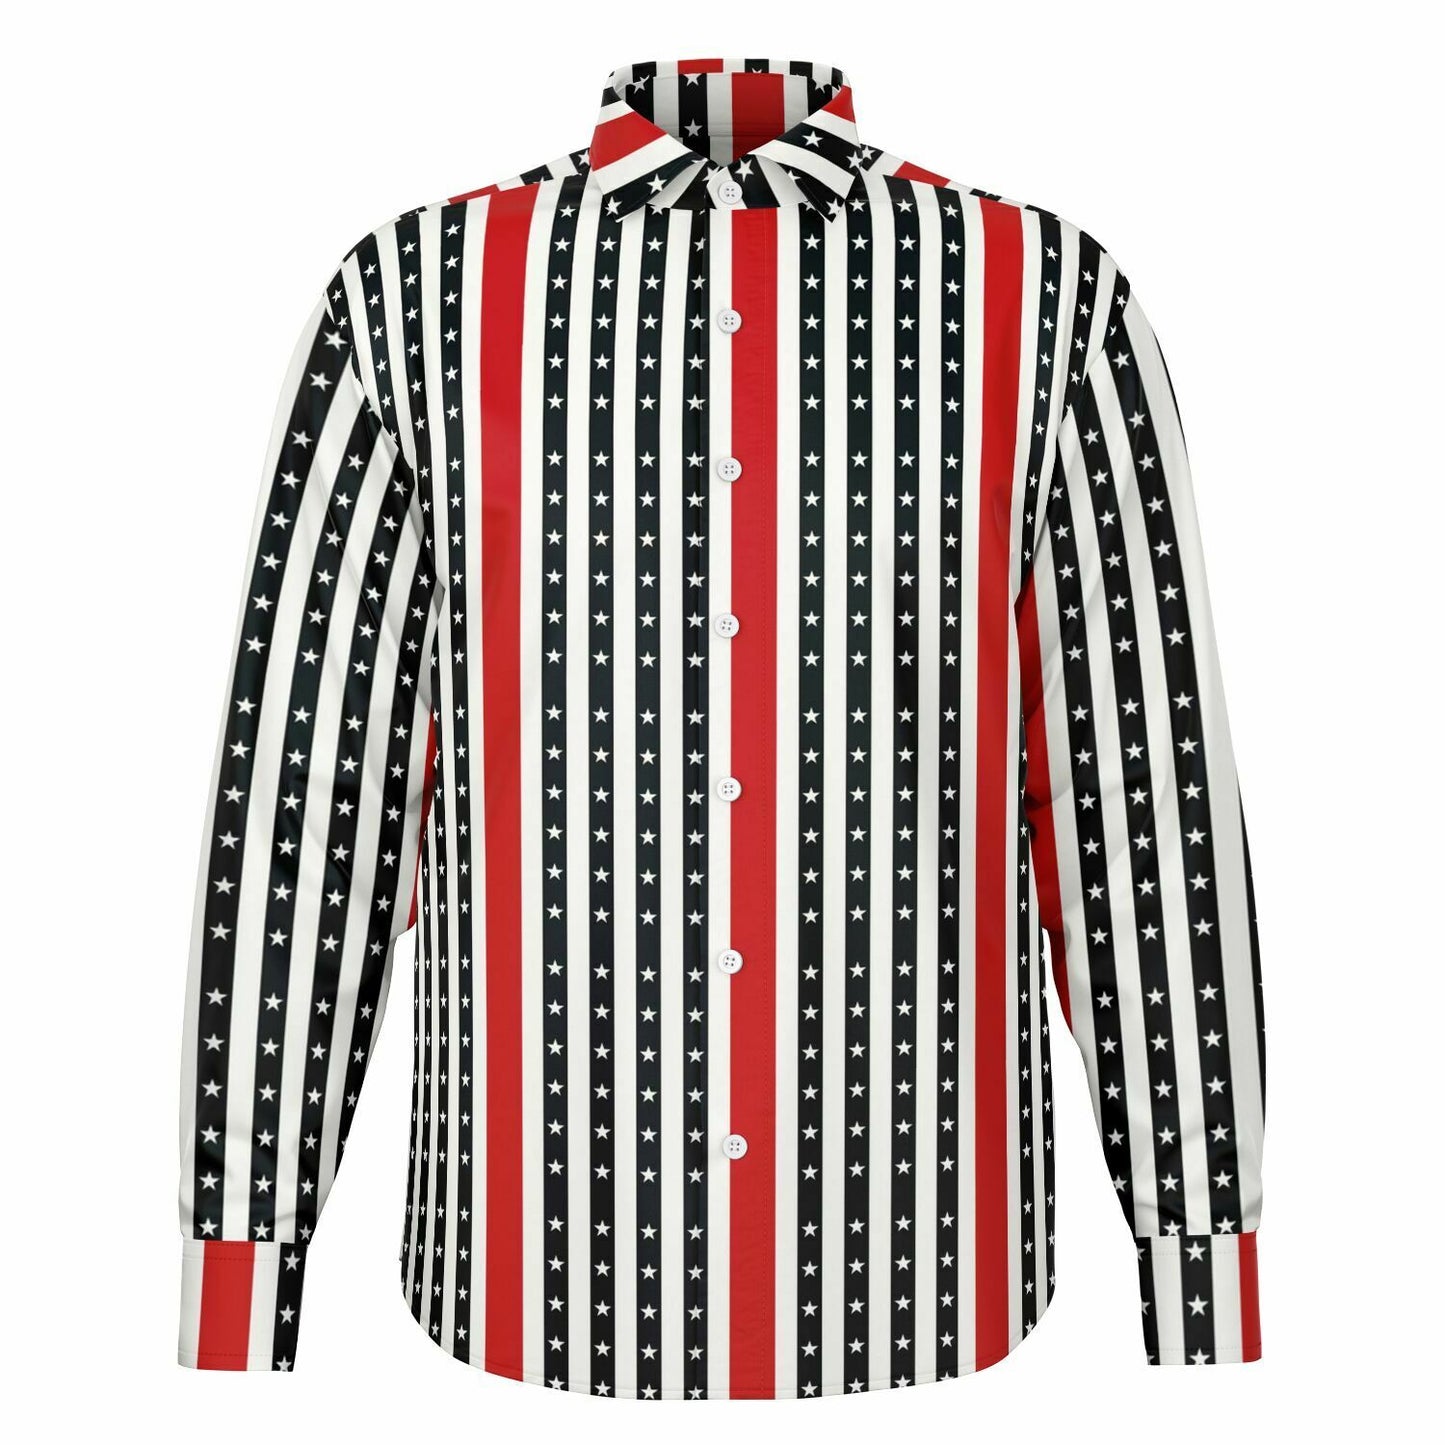 American Patriotic Long Sleeve Men Button Up Shirt, Red White Blue Stripes Stars Guys Male Print Buttoned Down Collared Casual Dress Shirt